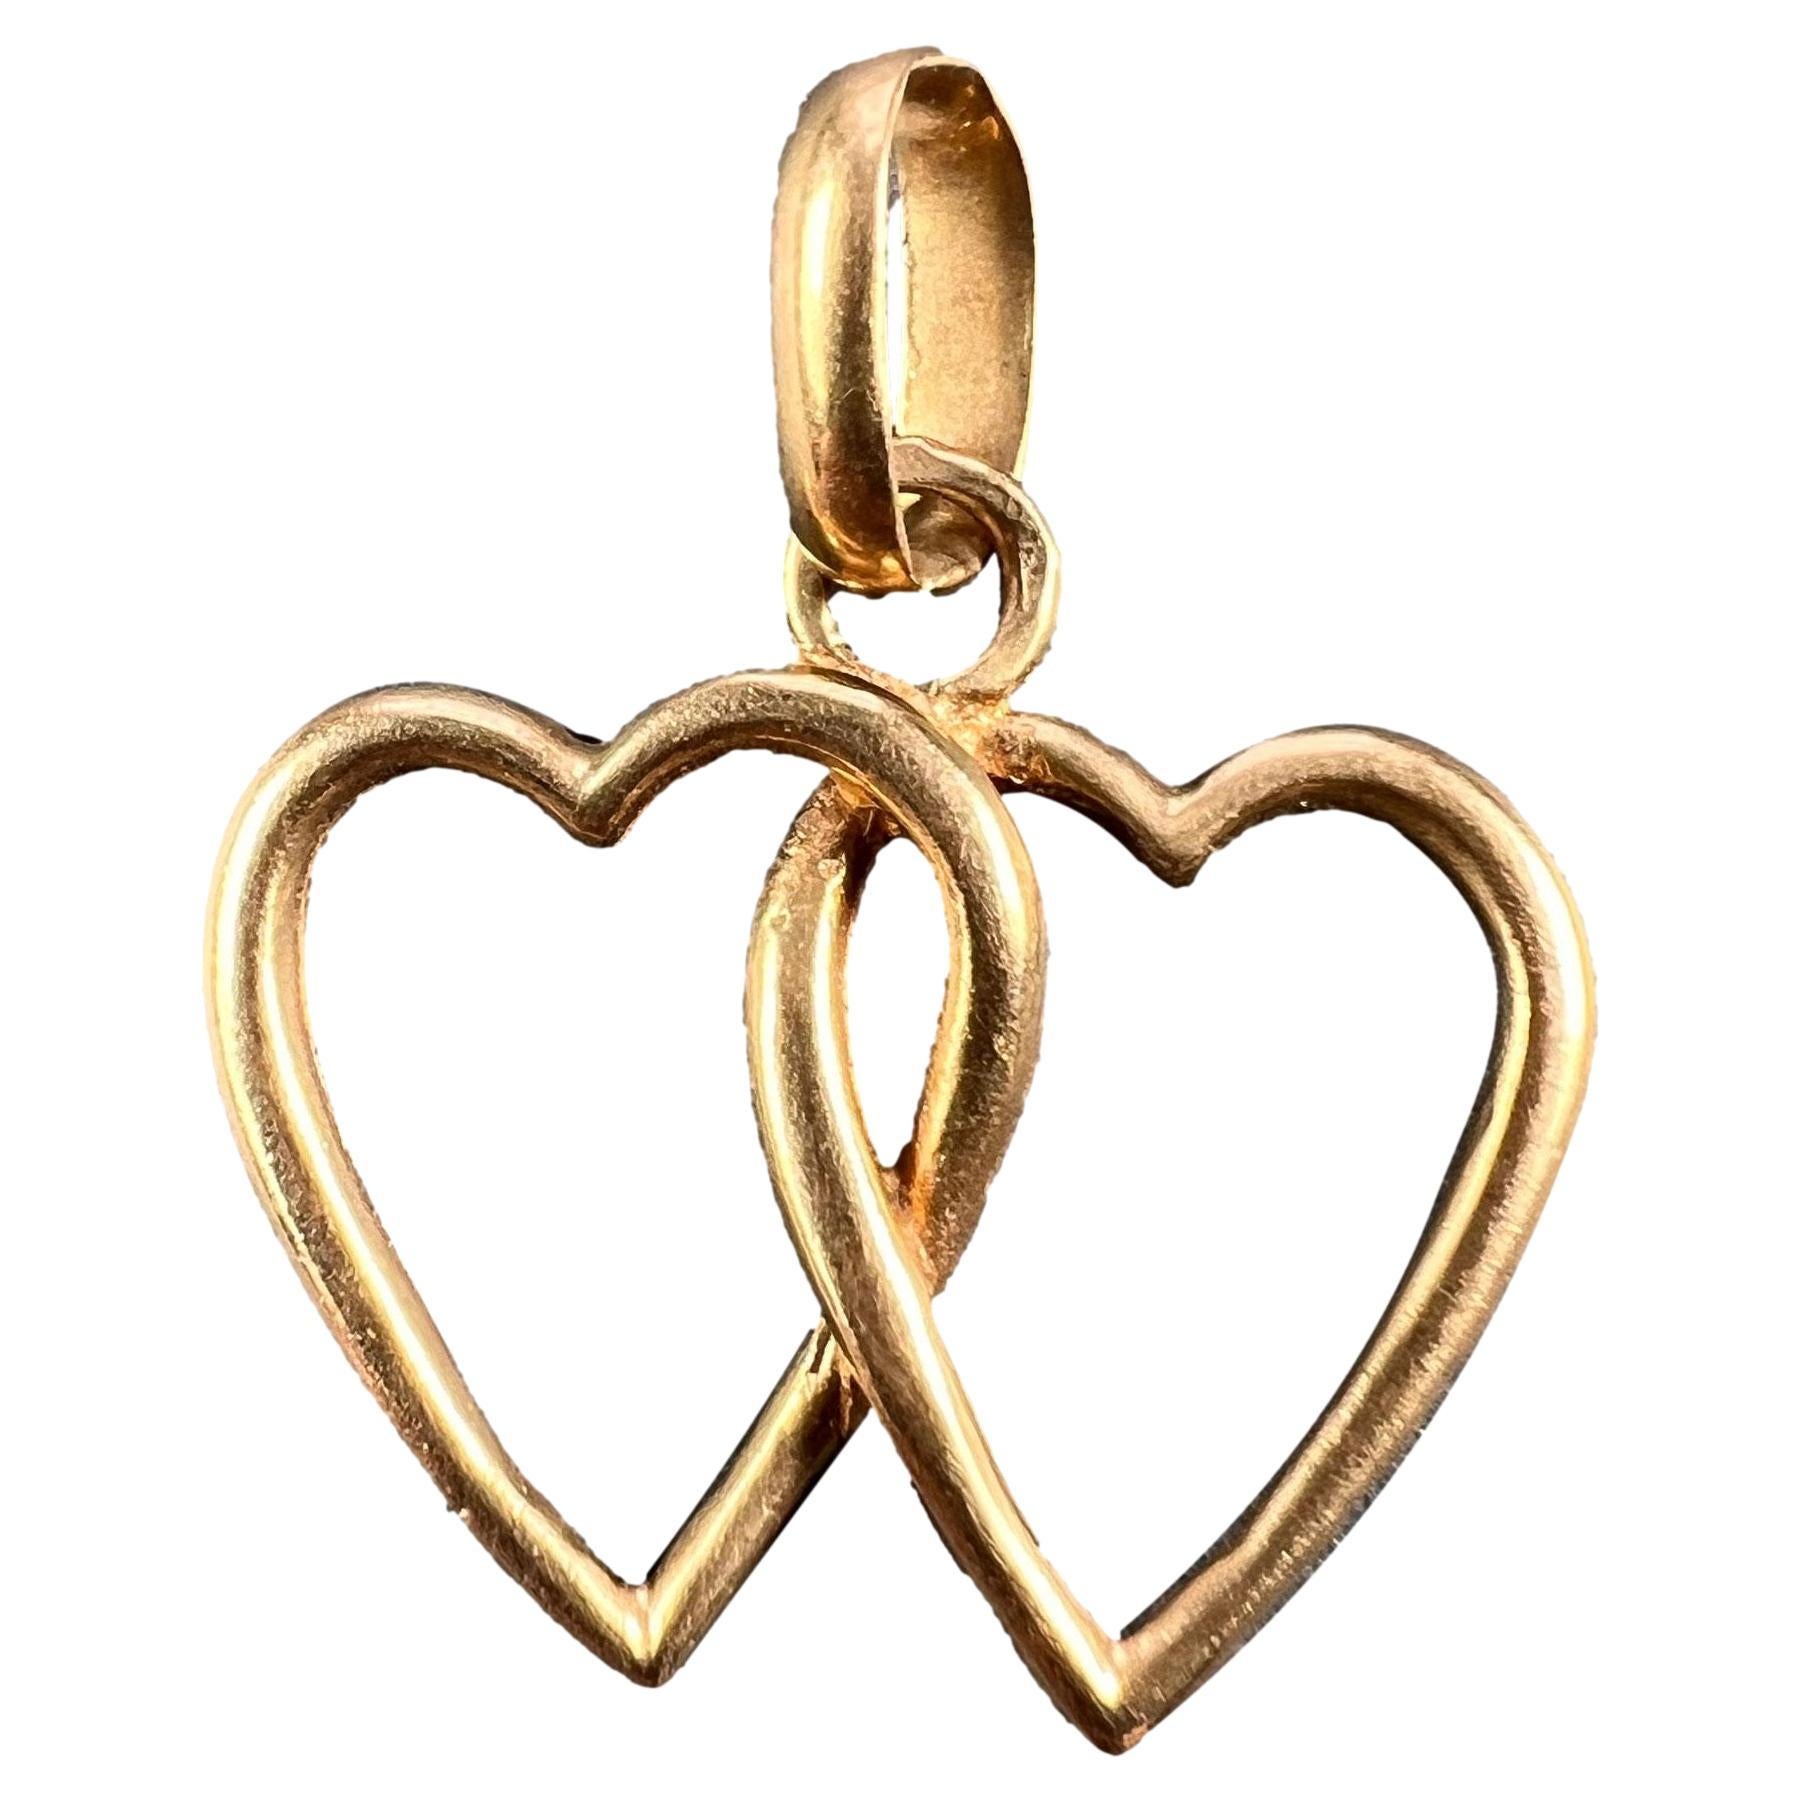 French 18k Yellow Gold Entwined Love Hearts Charm Pendant